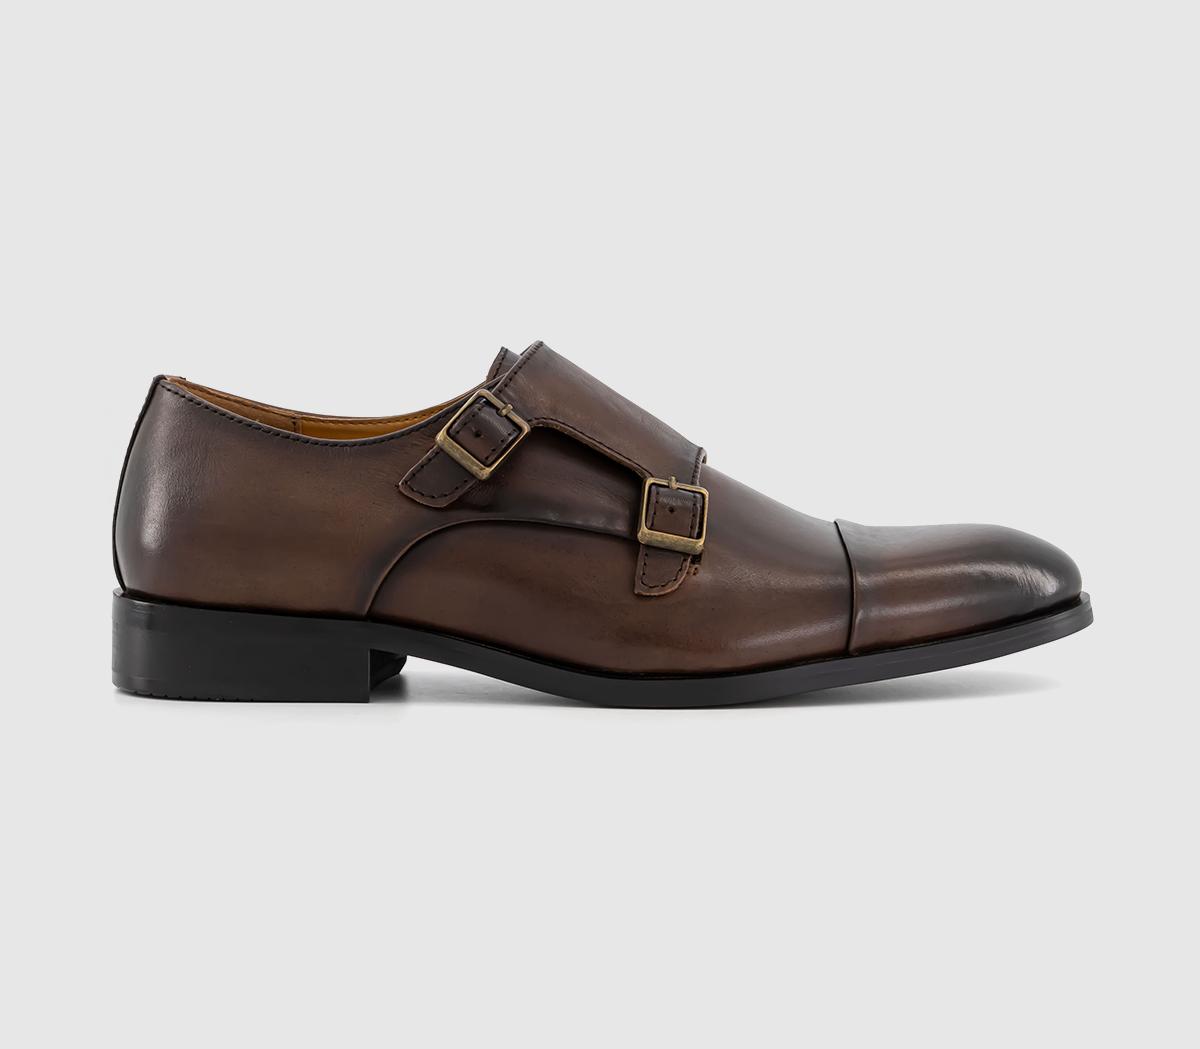 OFFICEMitre Toecap Monk ShoesBrown Leather